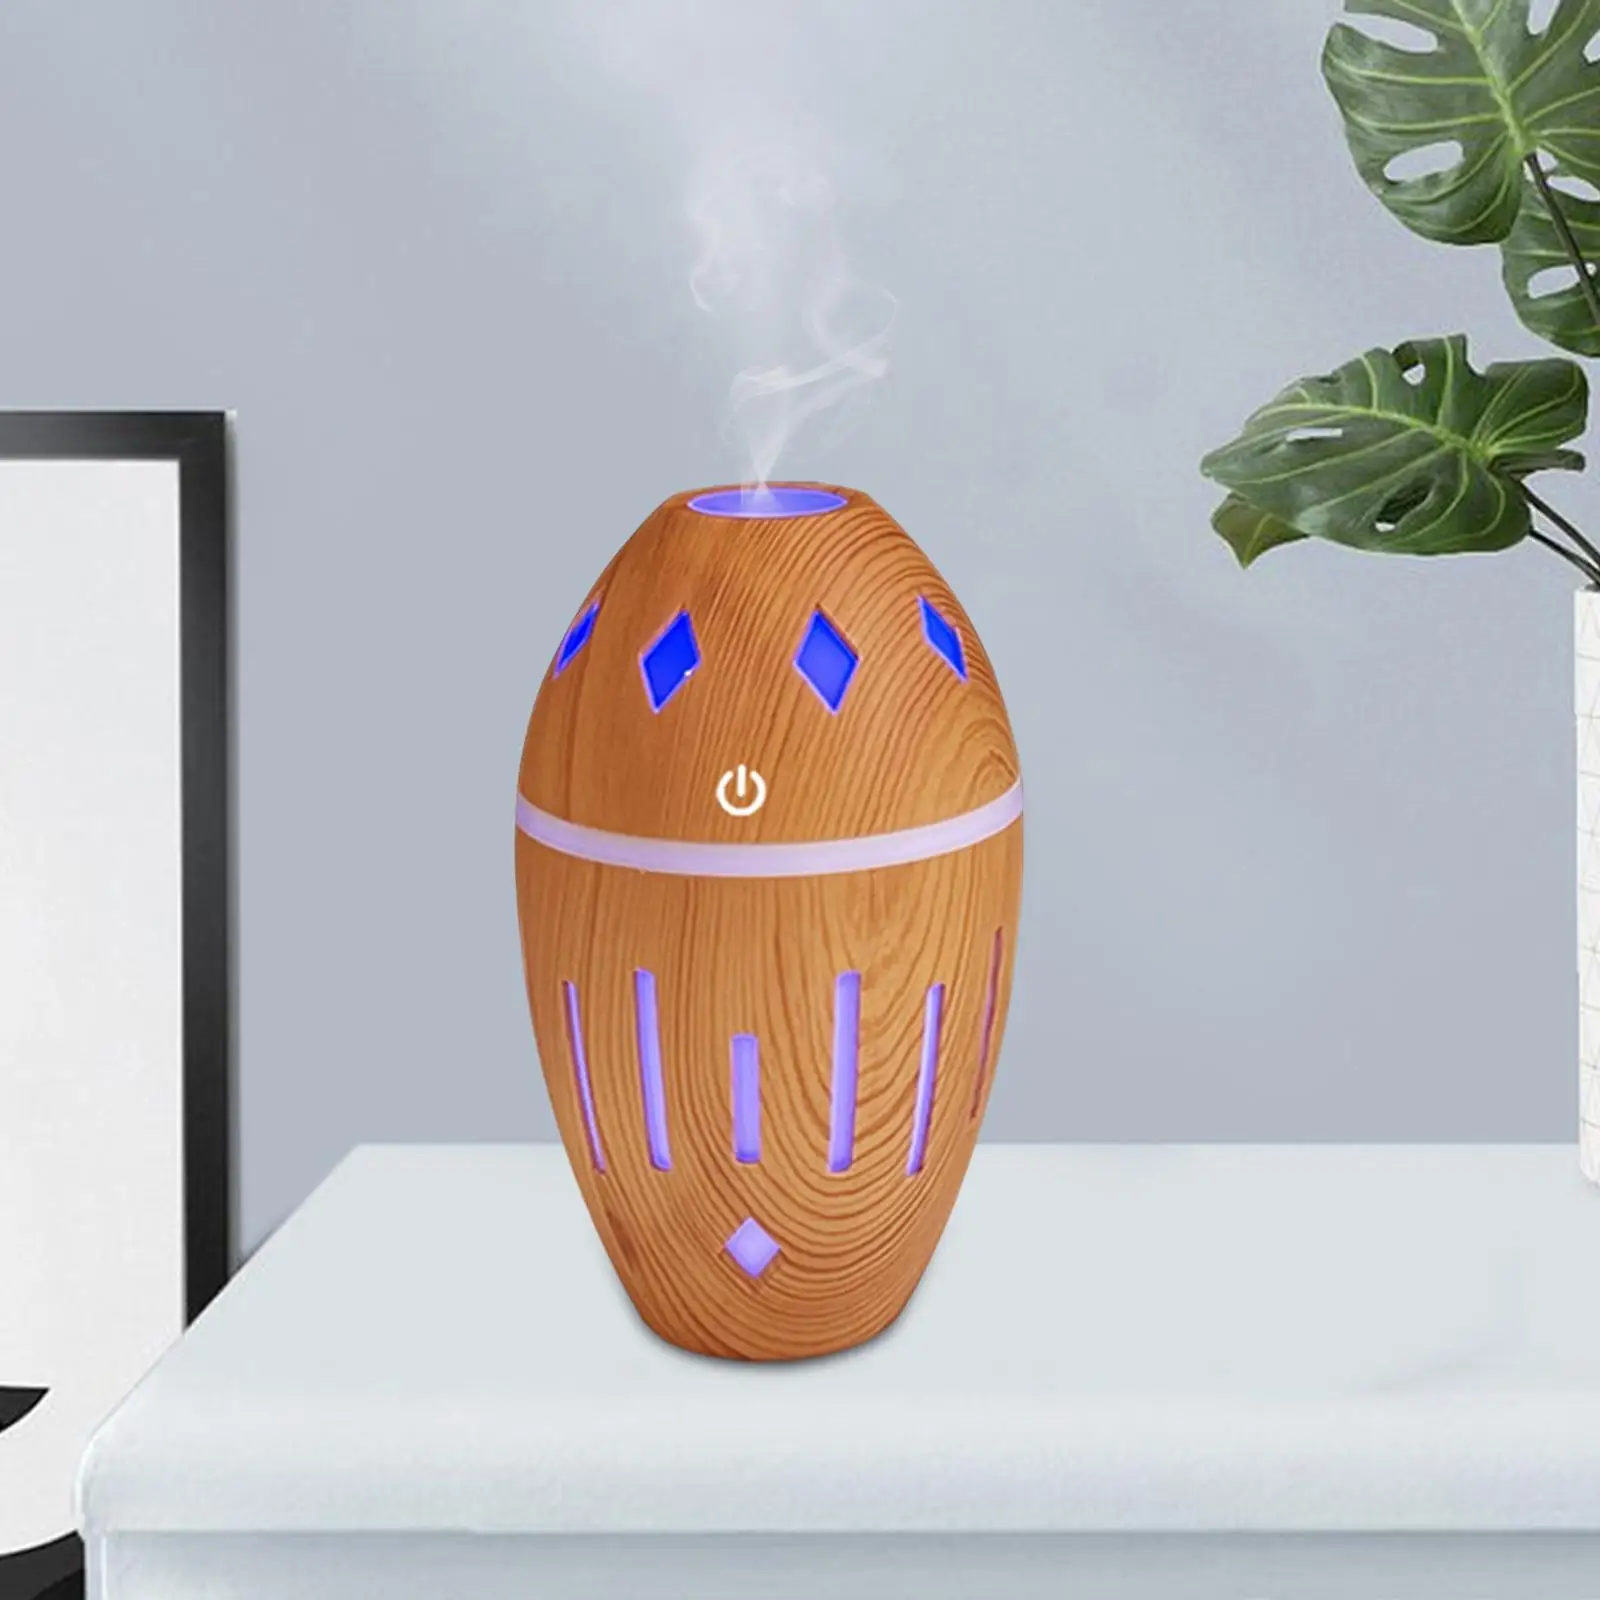 Cool Mist Humidifier Night Light Personal Wood Grain 300ml Air Humidifier Diffuser for Indoor Dorm Car Office Bedroom